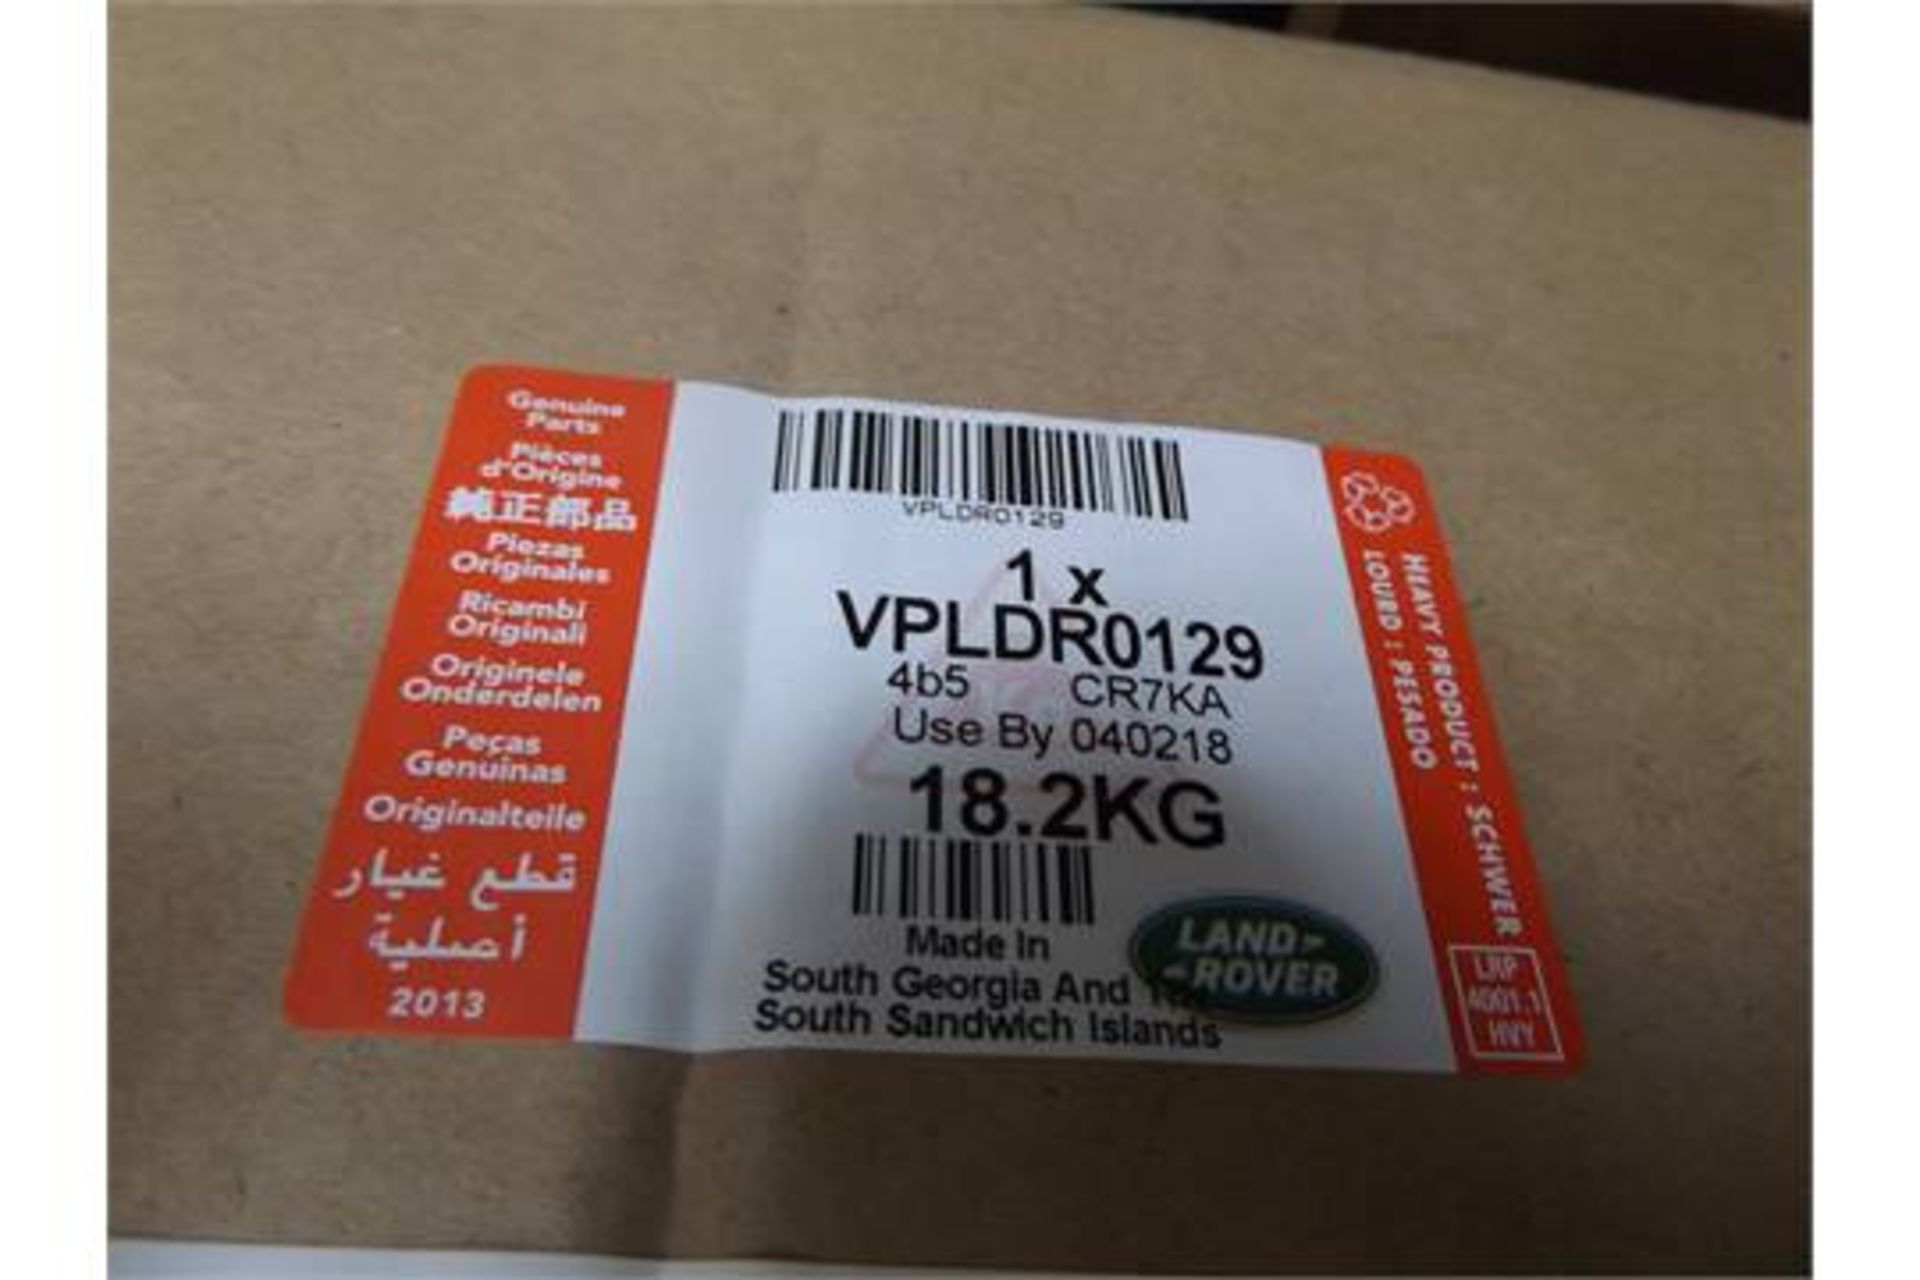 Land Rover Swing Out Spare Wheel Carrier Kit VPLDR0129 - Image 9 of 10